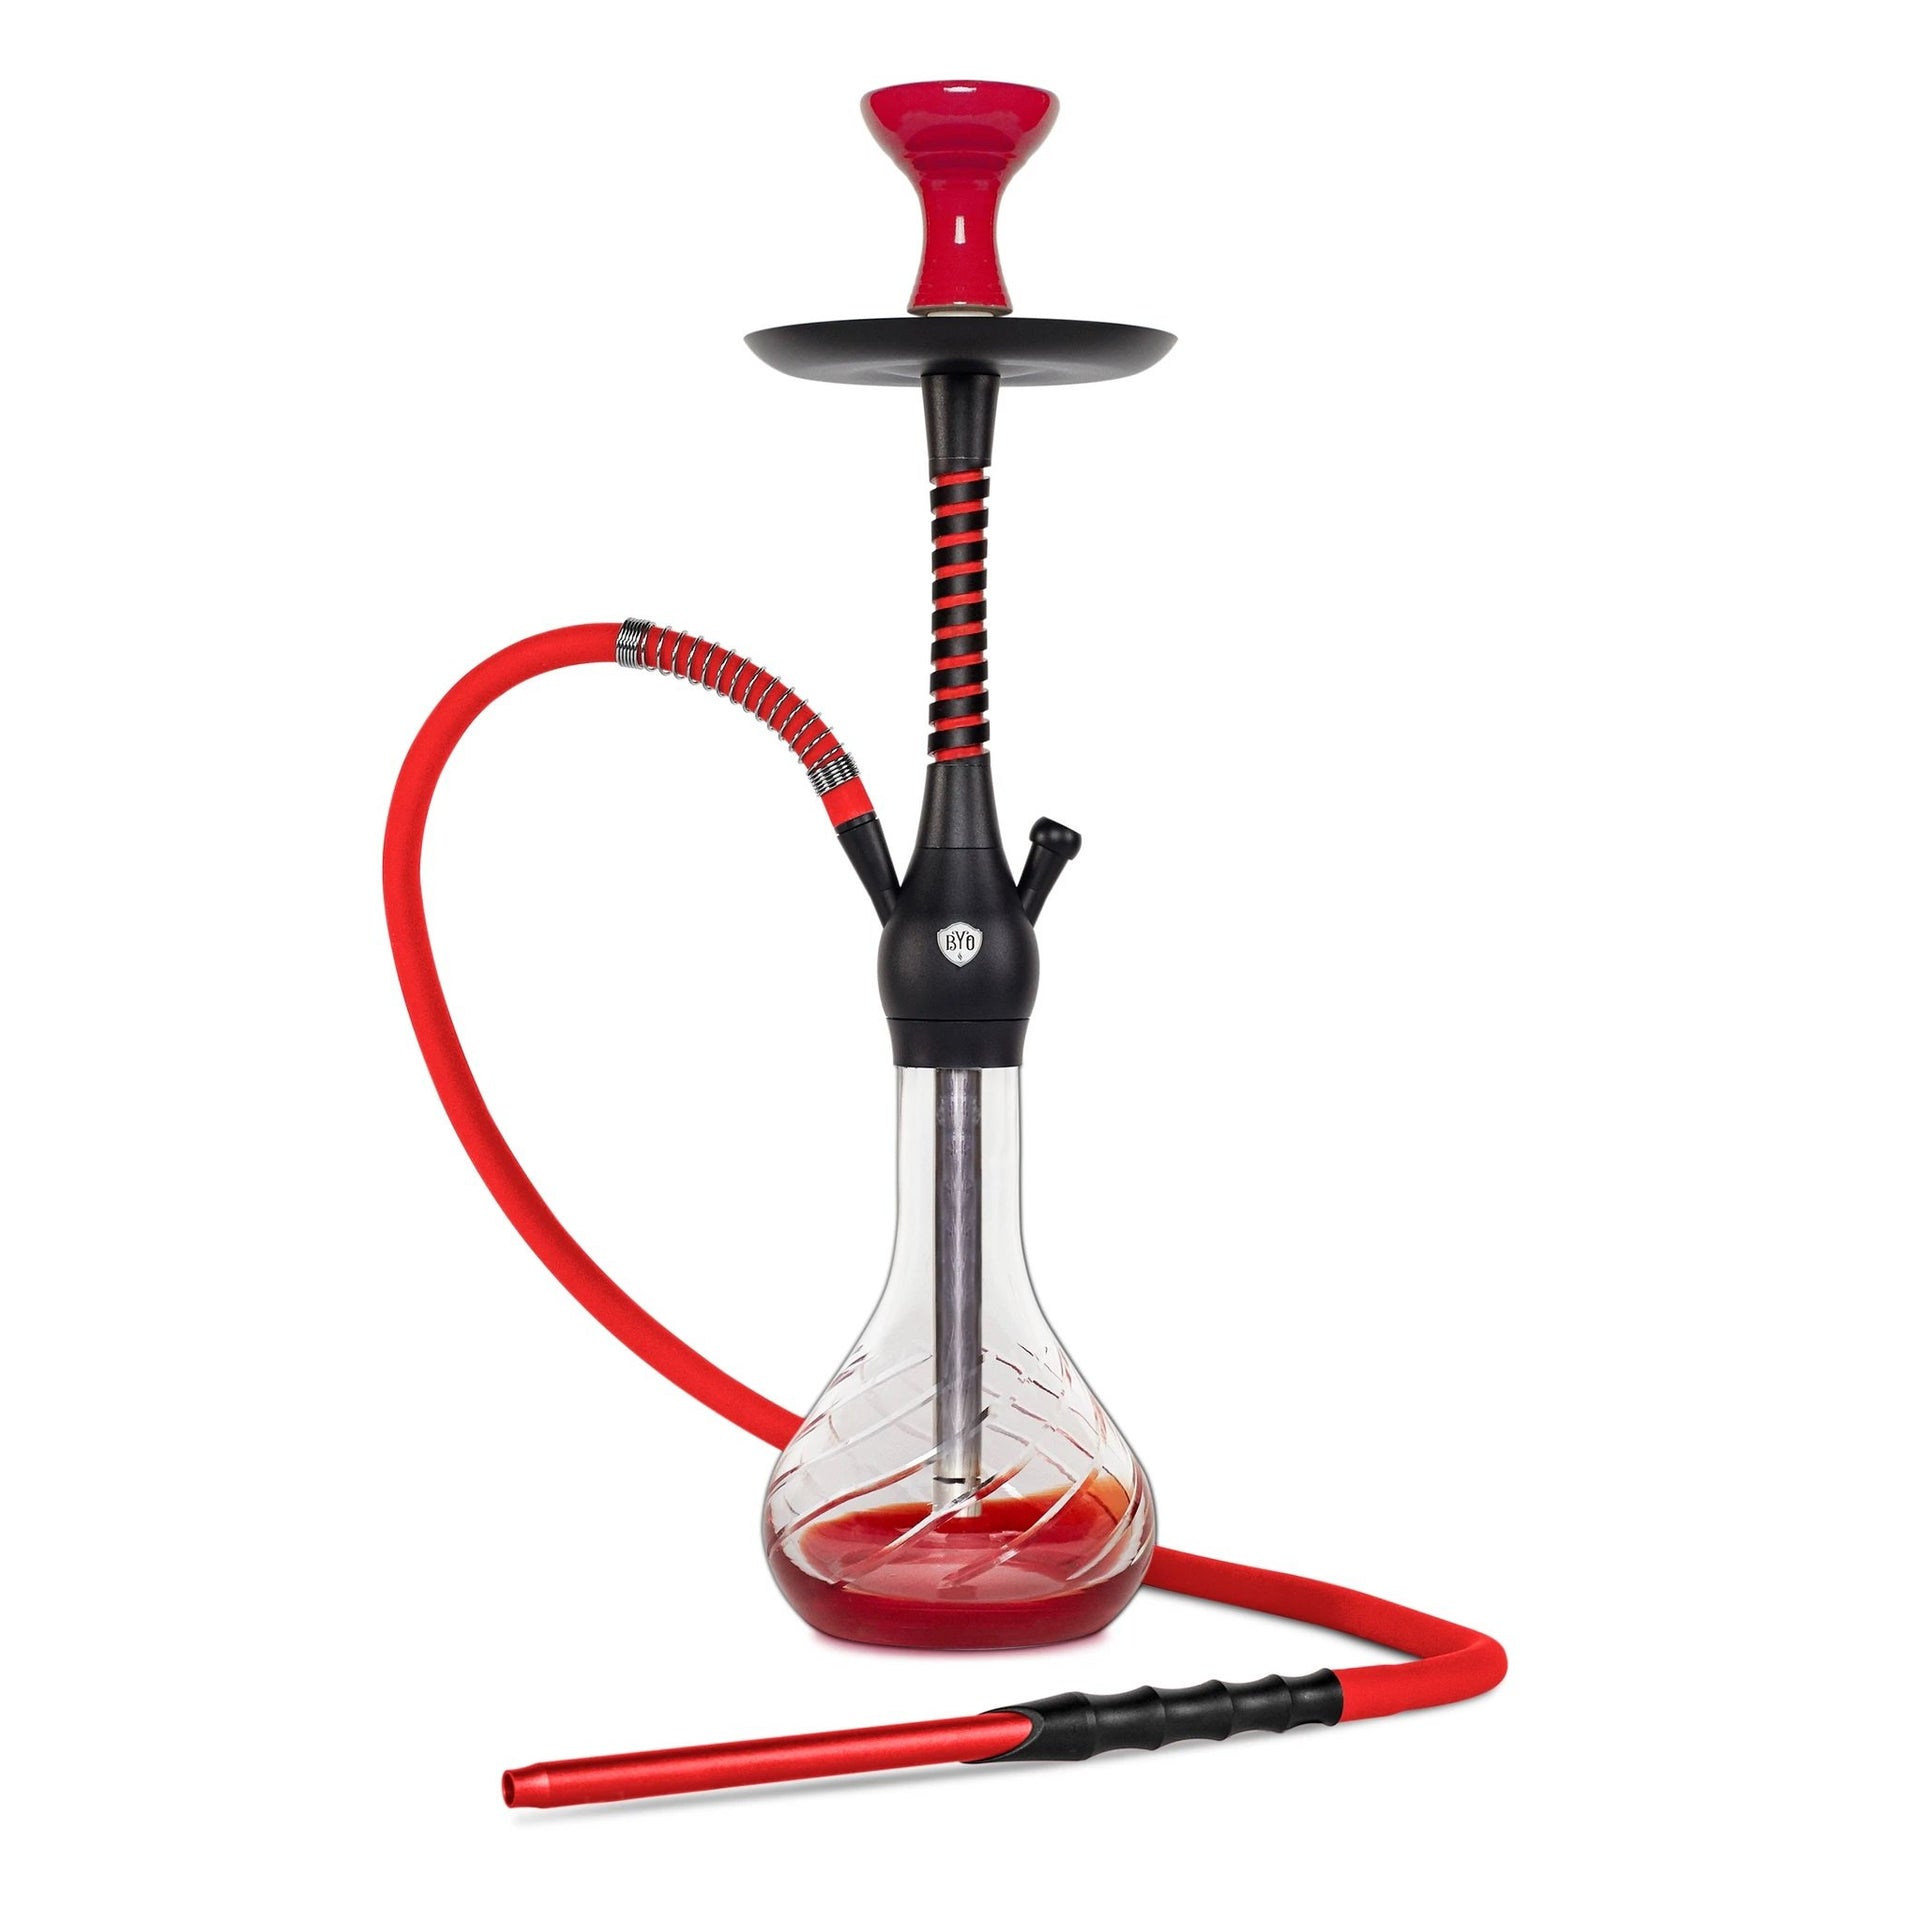 BYO Spirex Hookah 22" red stem matching clear base and hose